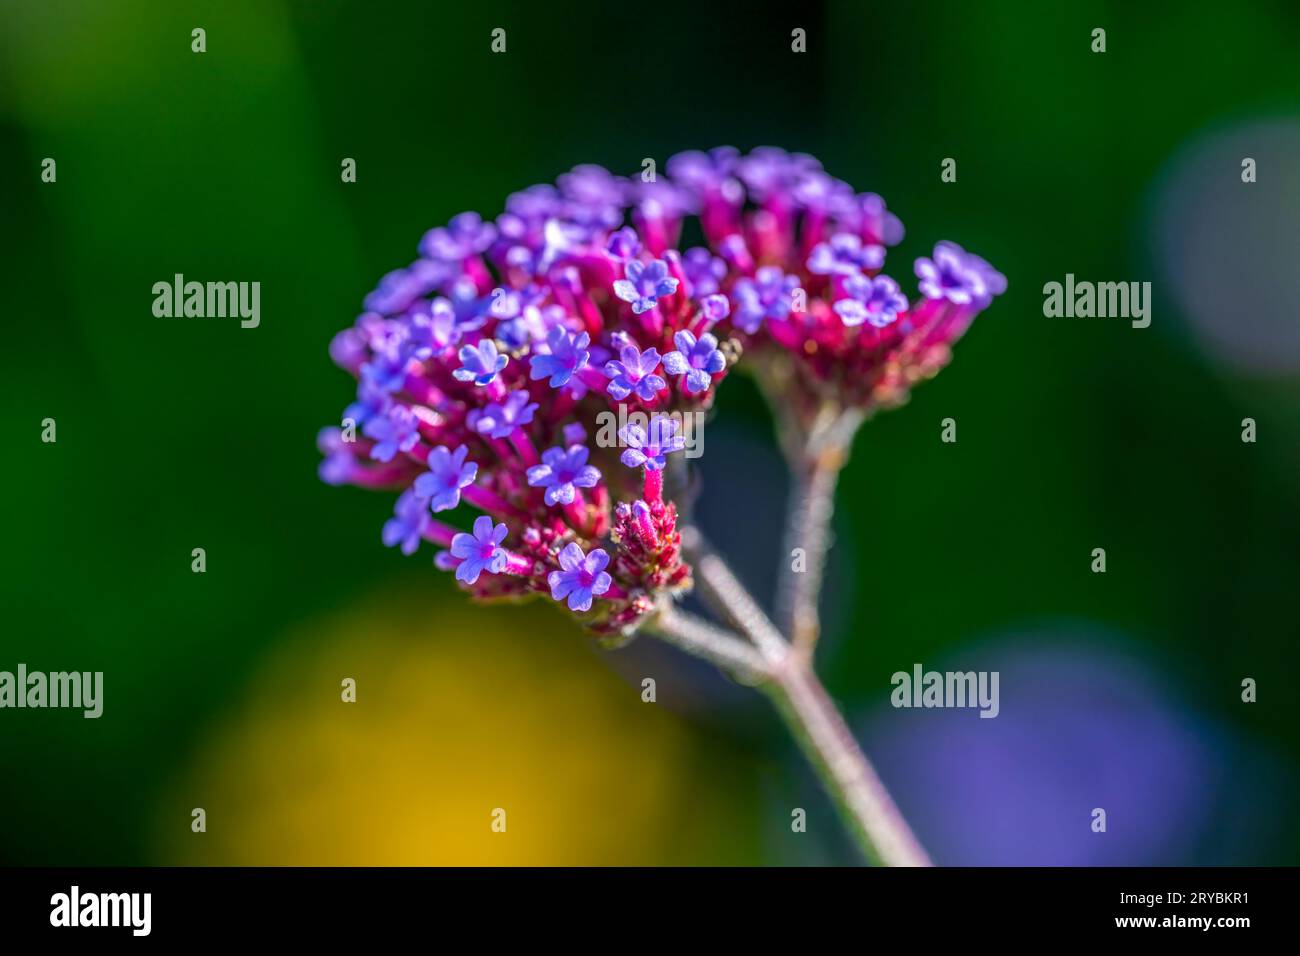 A cluster of purple Verbena flowers Stock Photo